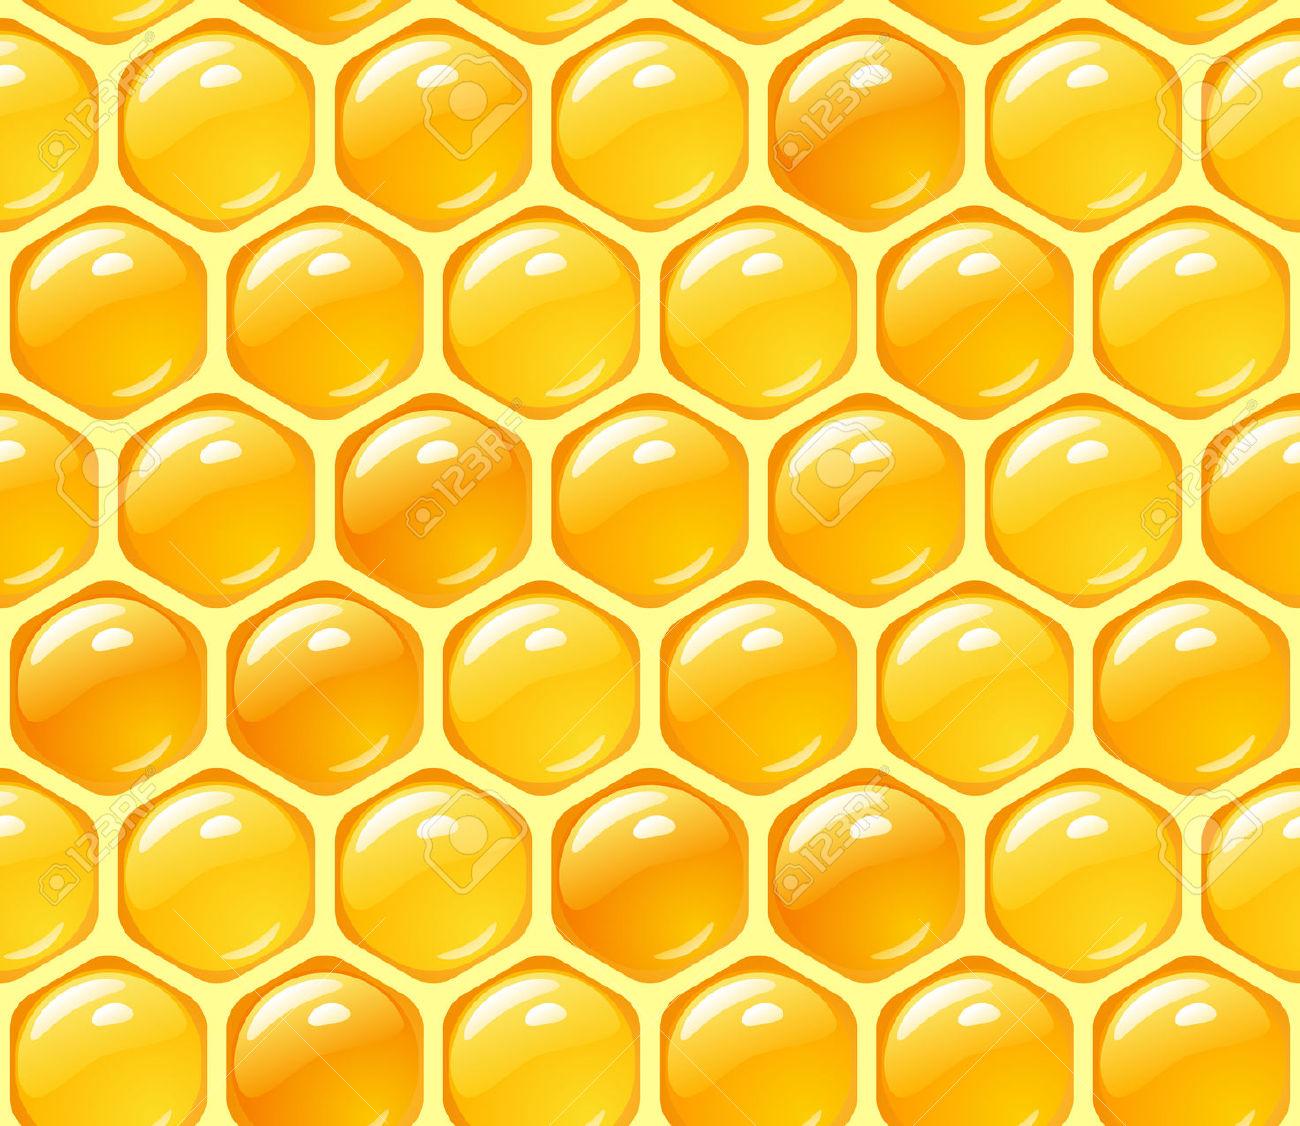 Free Honeycomb Background Cliparts, Download Free Honeycomb Background